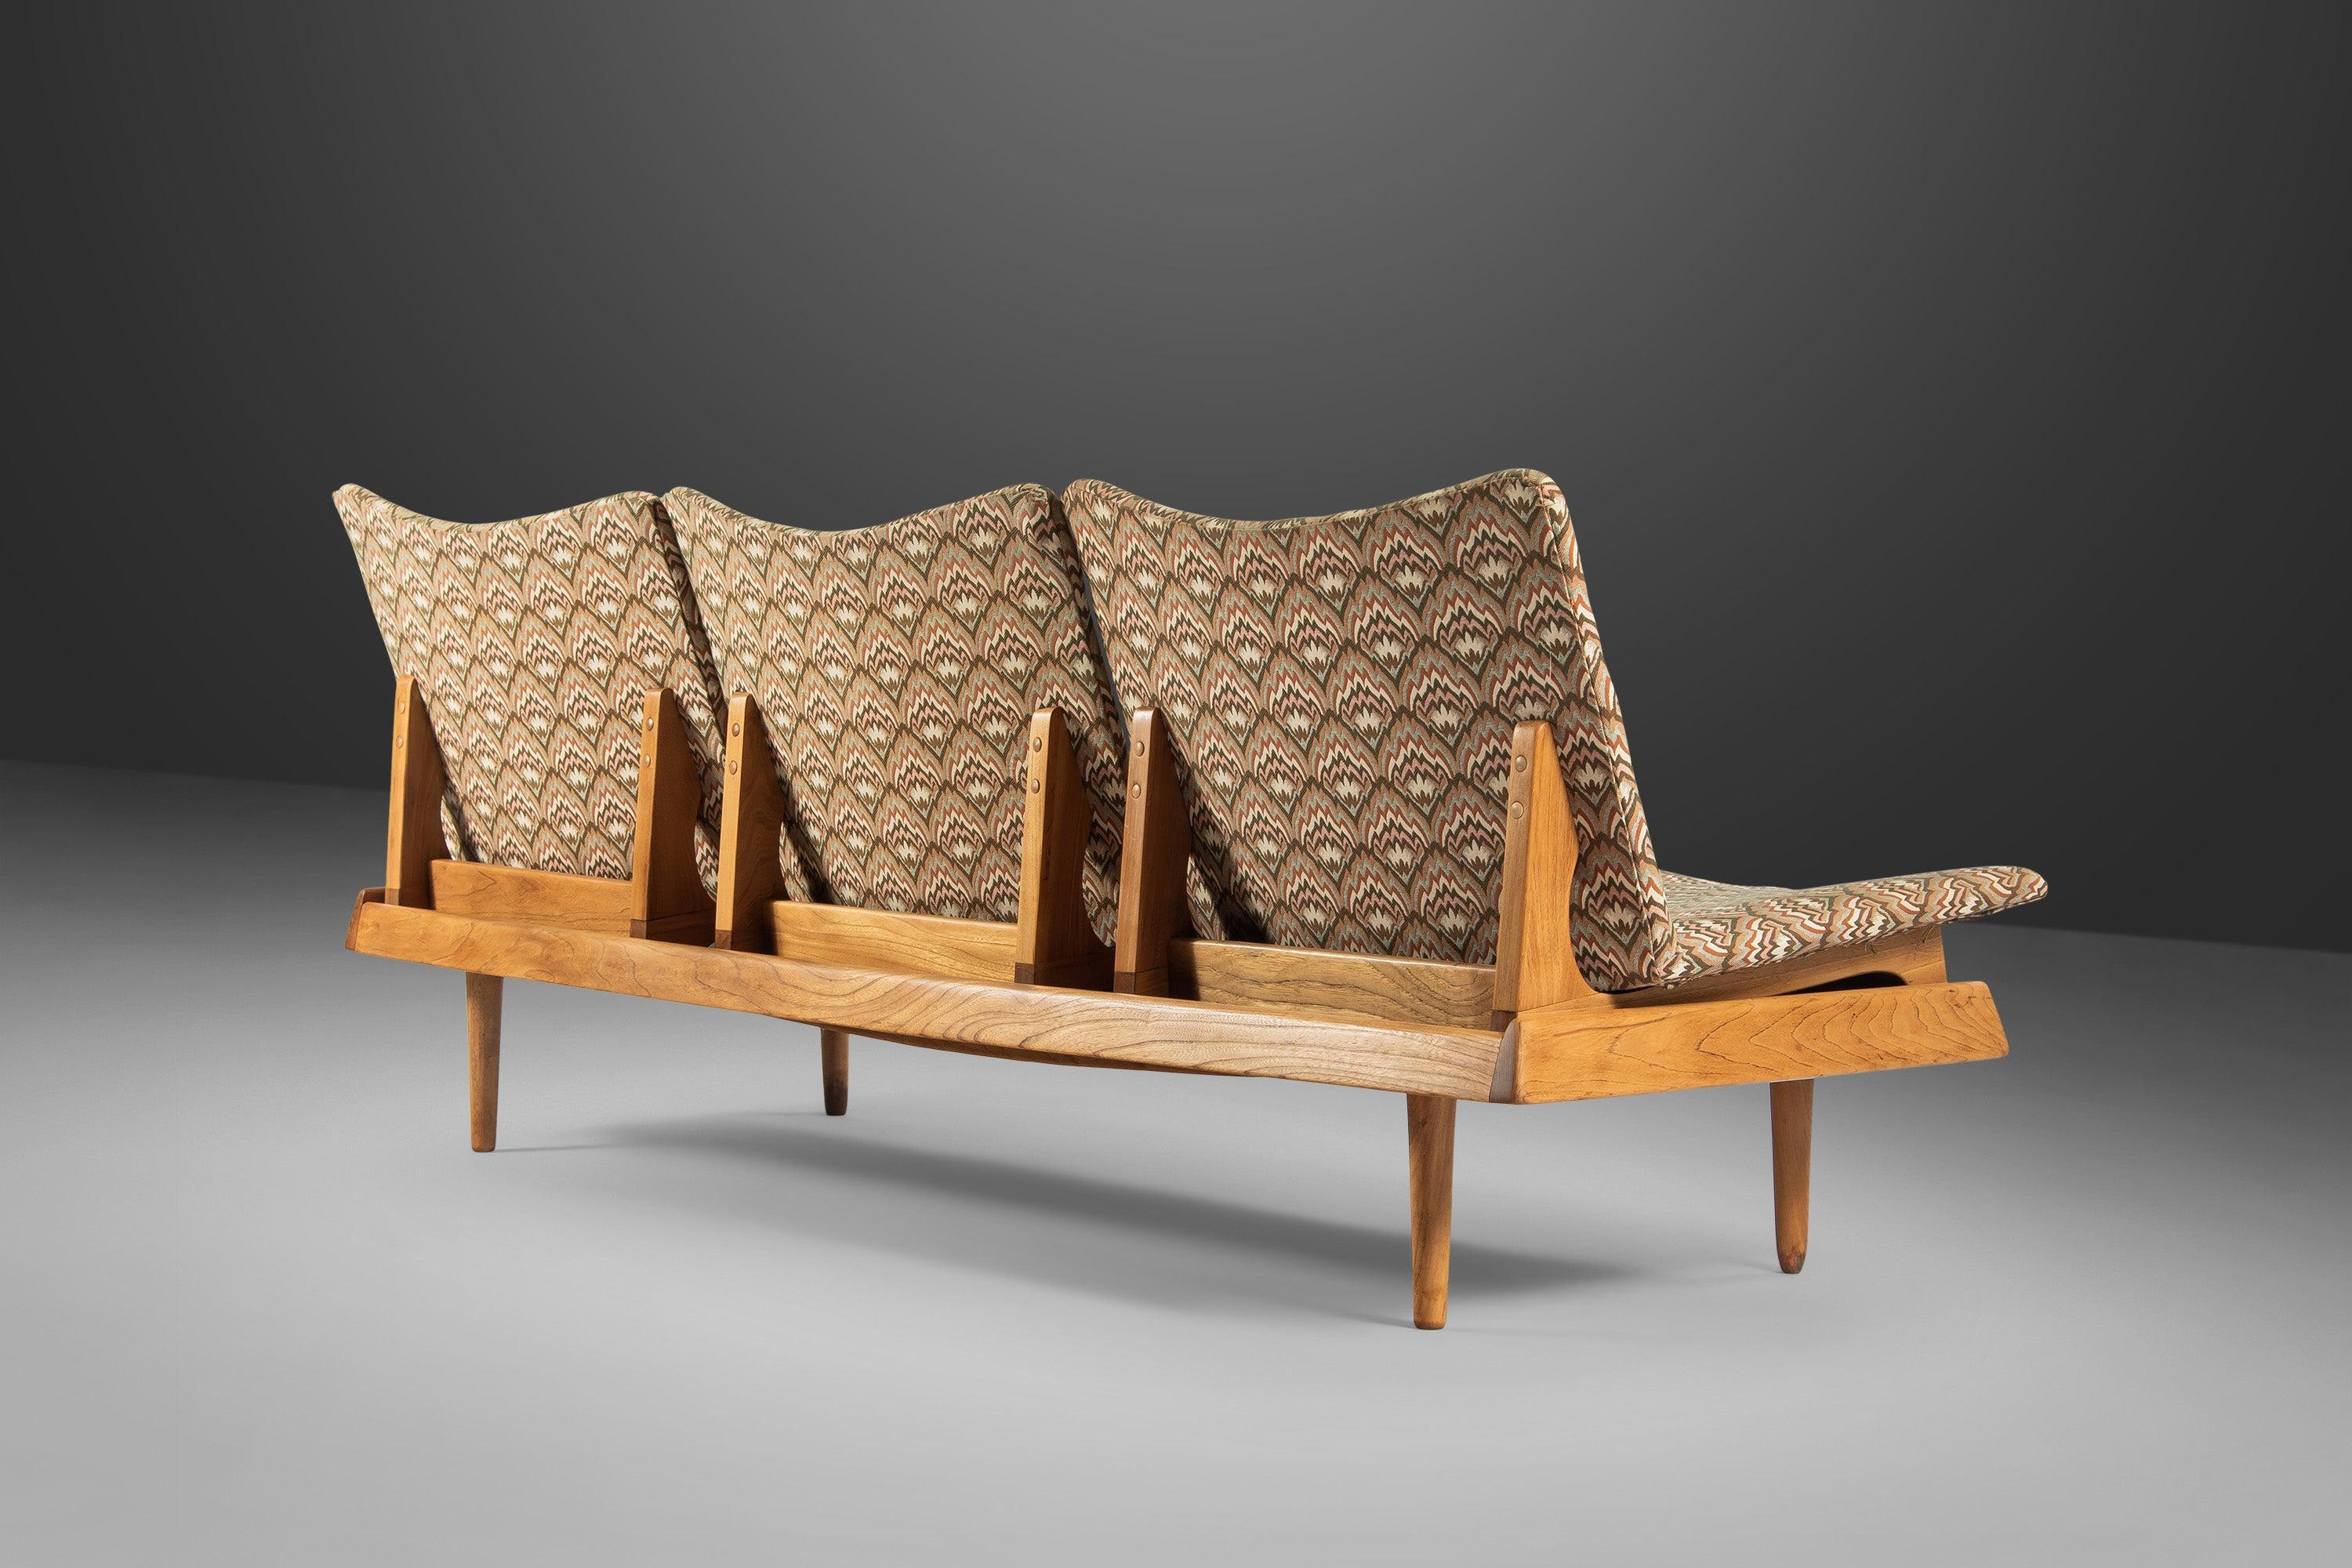 Attention collectors! Often mistaken for the Model 161 bench by Hans Olsen (for Bramin, this exquisite modular seating group by Gerald McCabe in naturally stained walnut and original upholstery is as rare as it is visually striking. In 100%